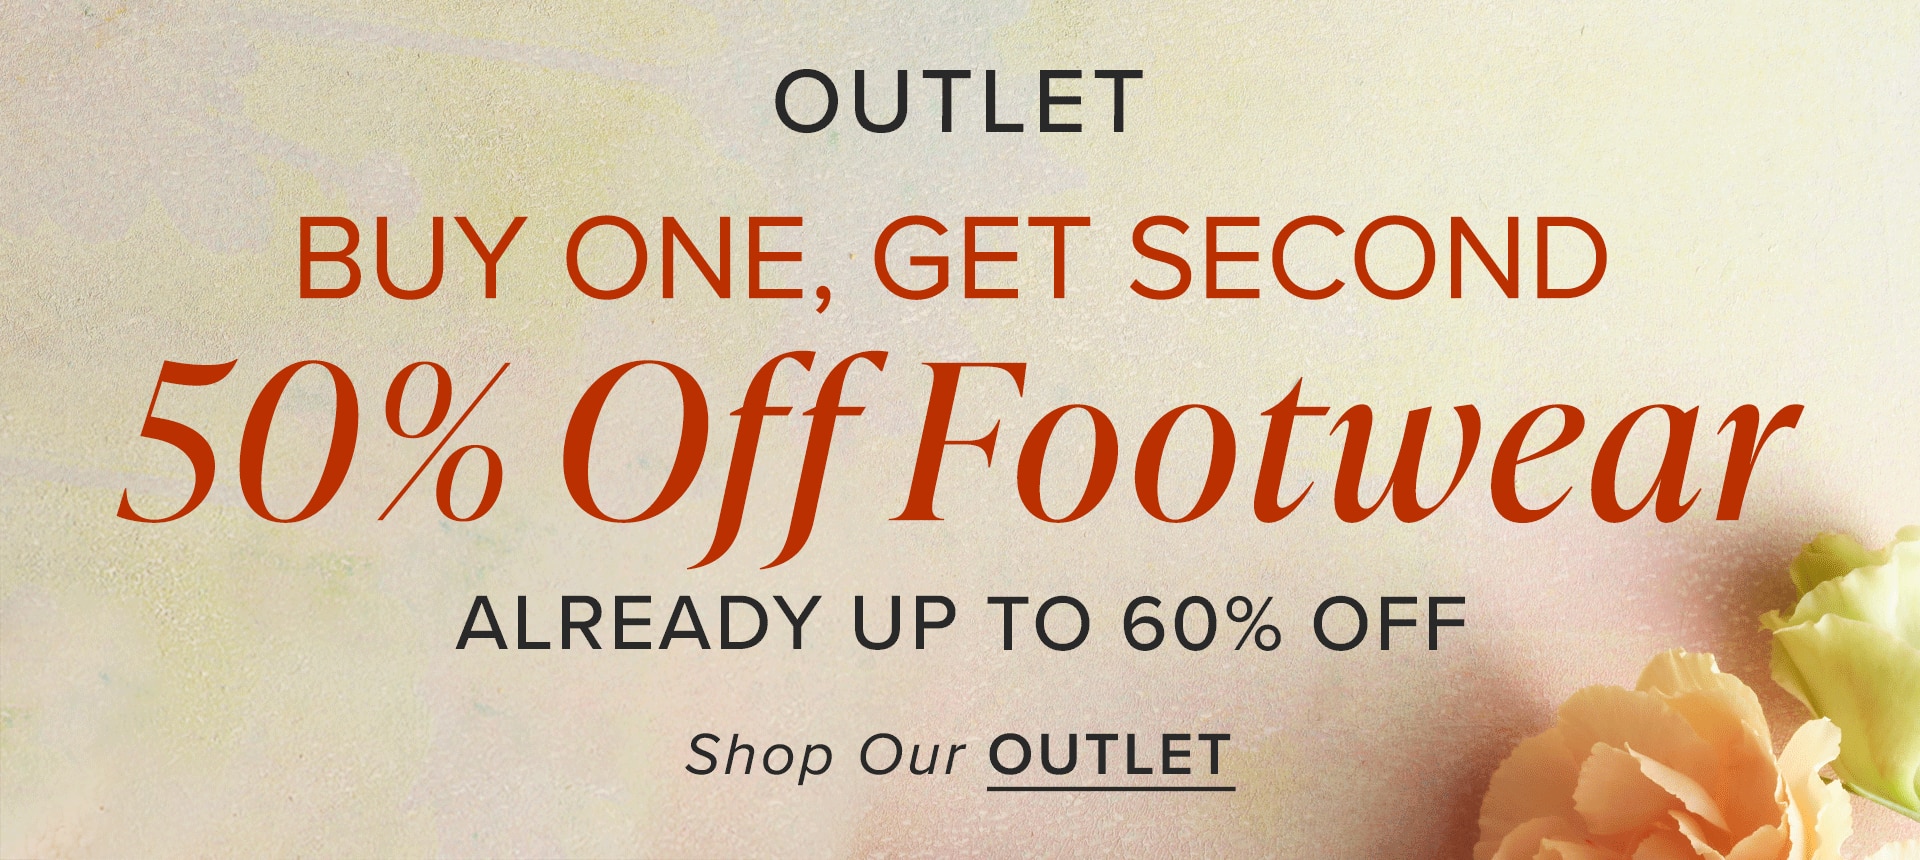 Buy One, Get Second 50% Off Outlet Footwear